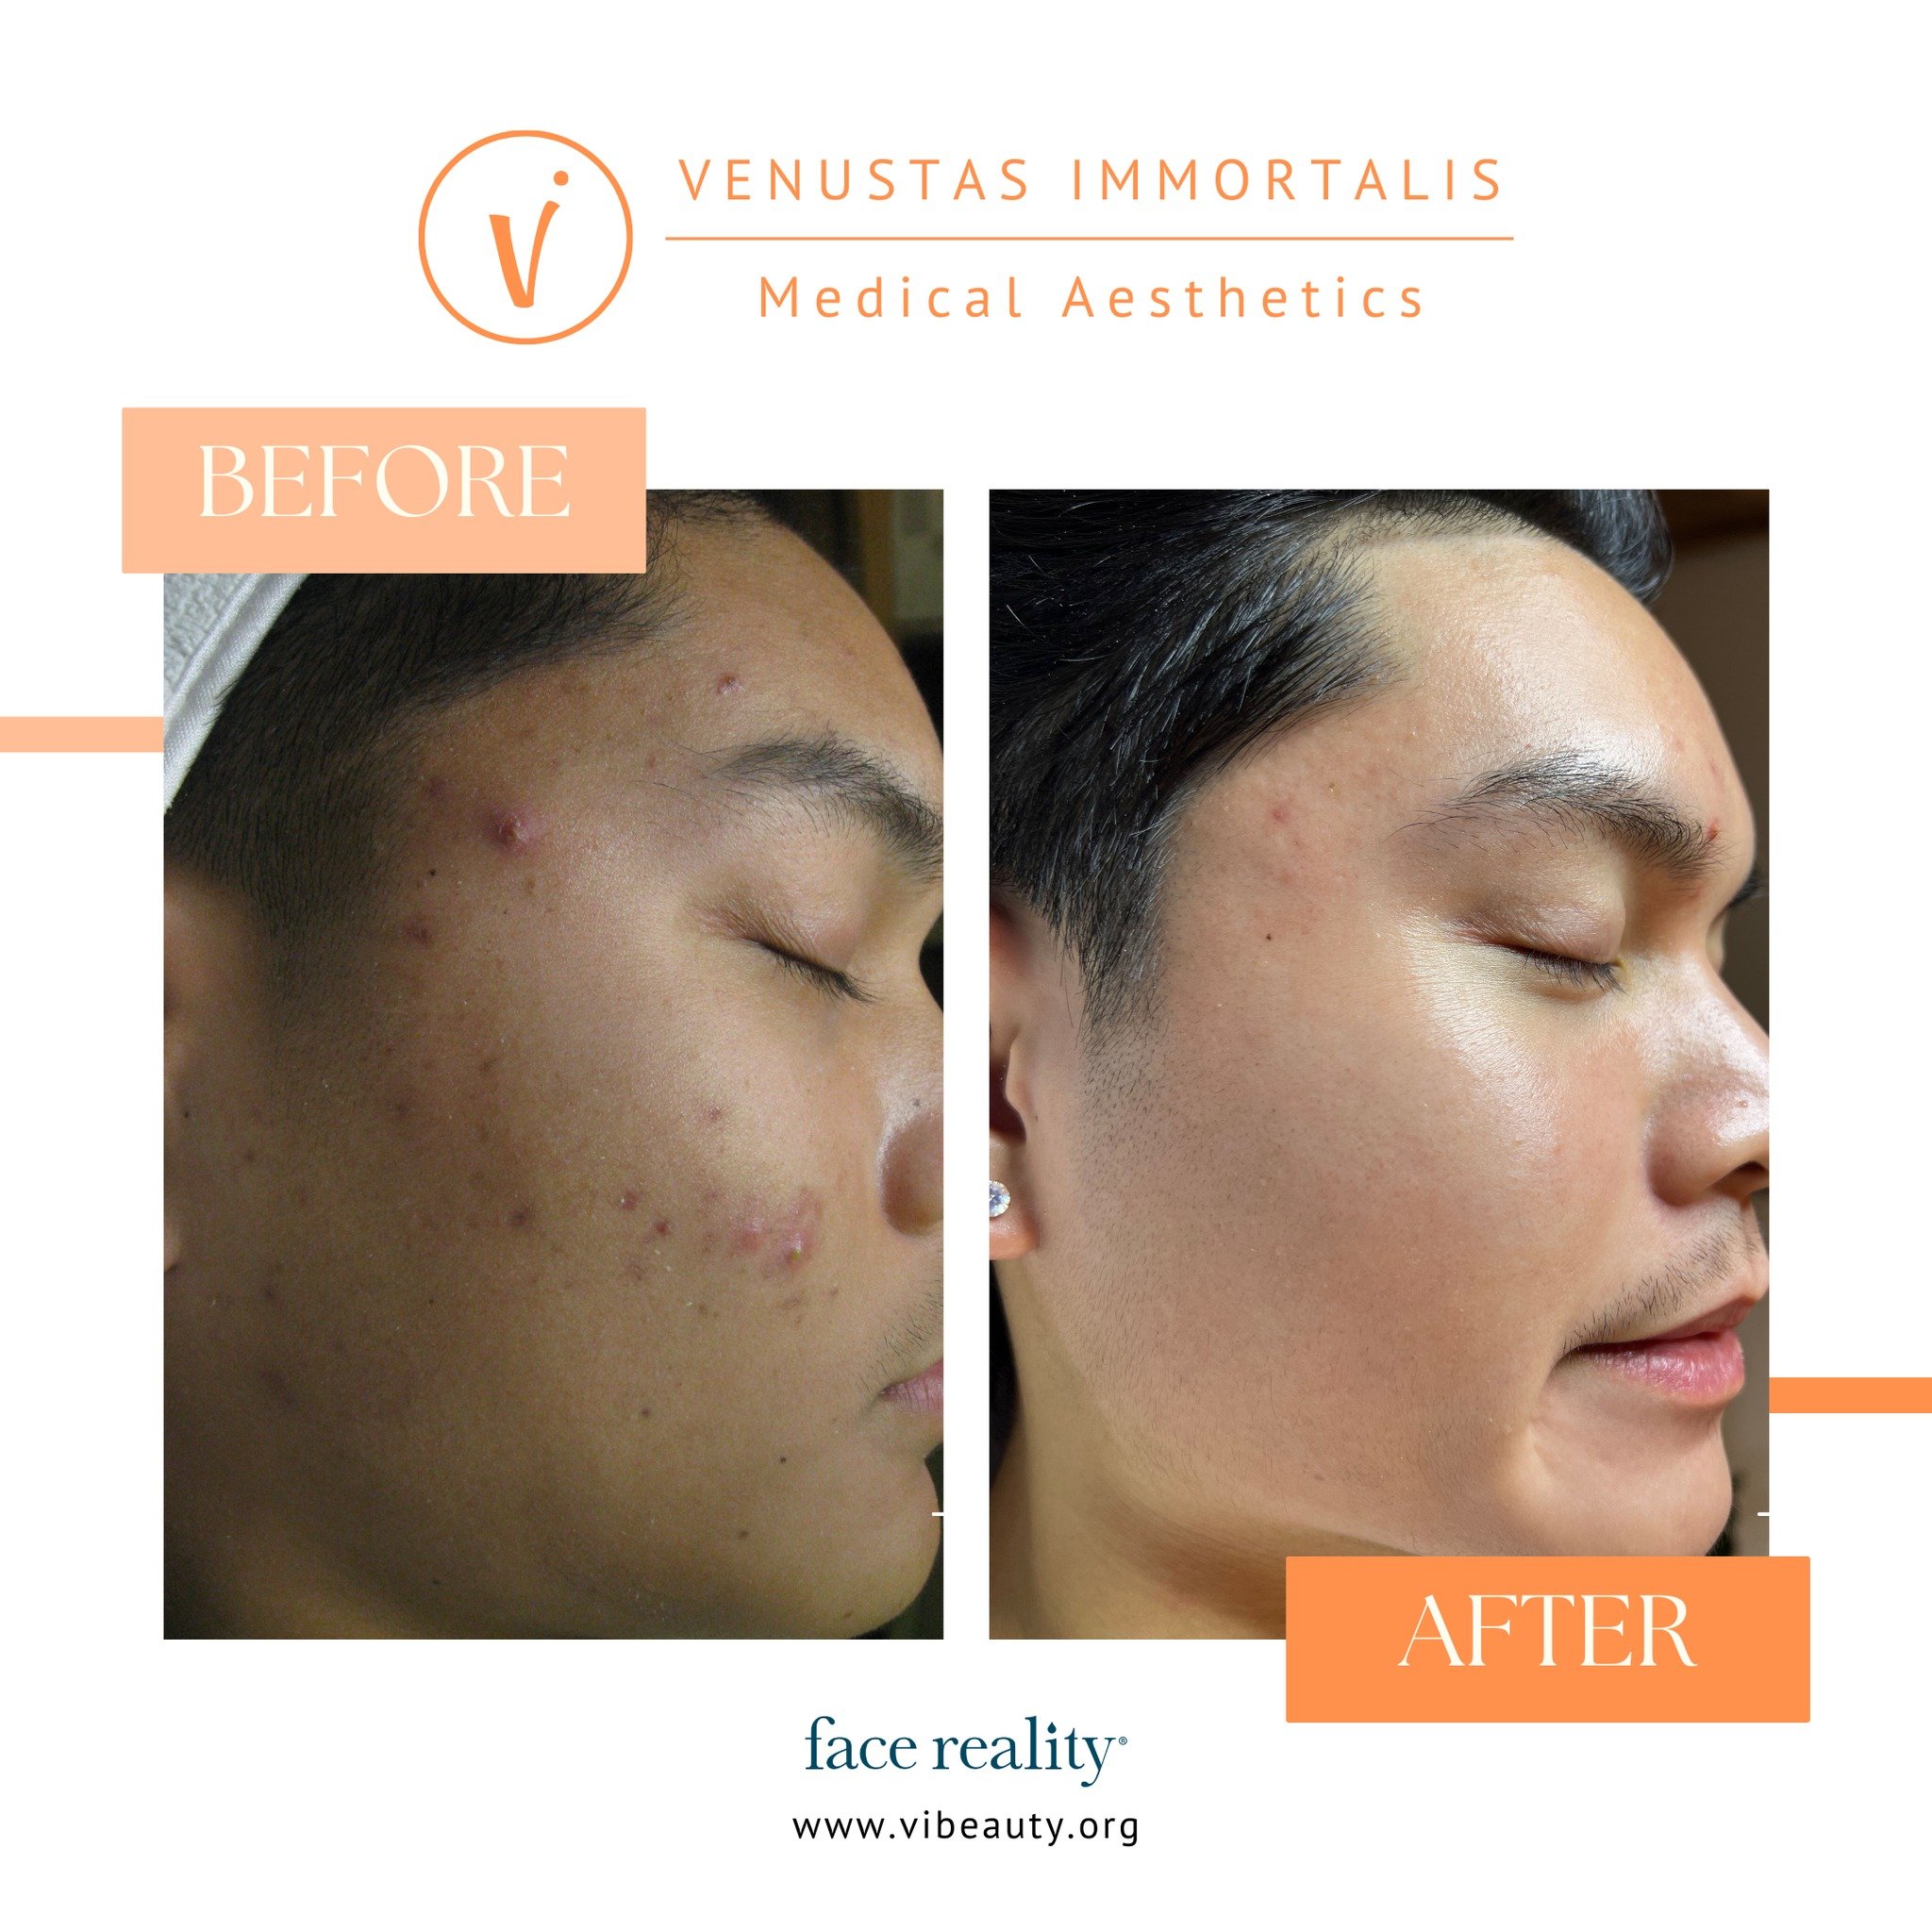 Clear skin is possible with the right acne treatments!🌟 Don't let breakouts hold you back. Take charge of your skin and discover the solutions that work for you. Learn more at vibeauty.org/acne-concerns #clearskintips #acnetreatment #acneproblems #b